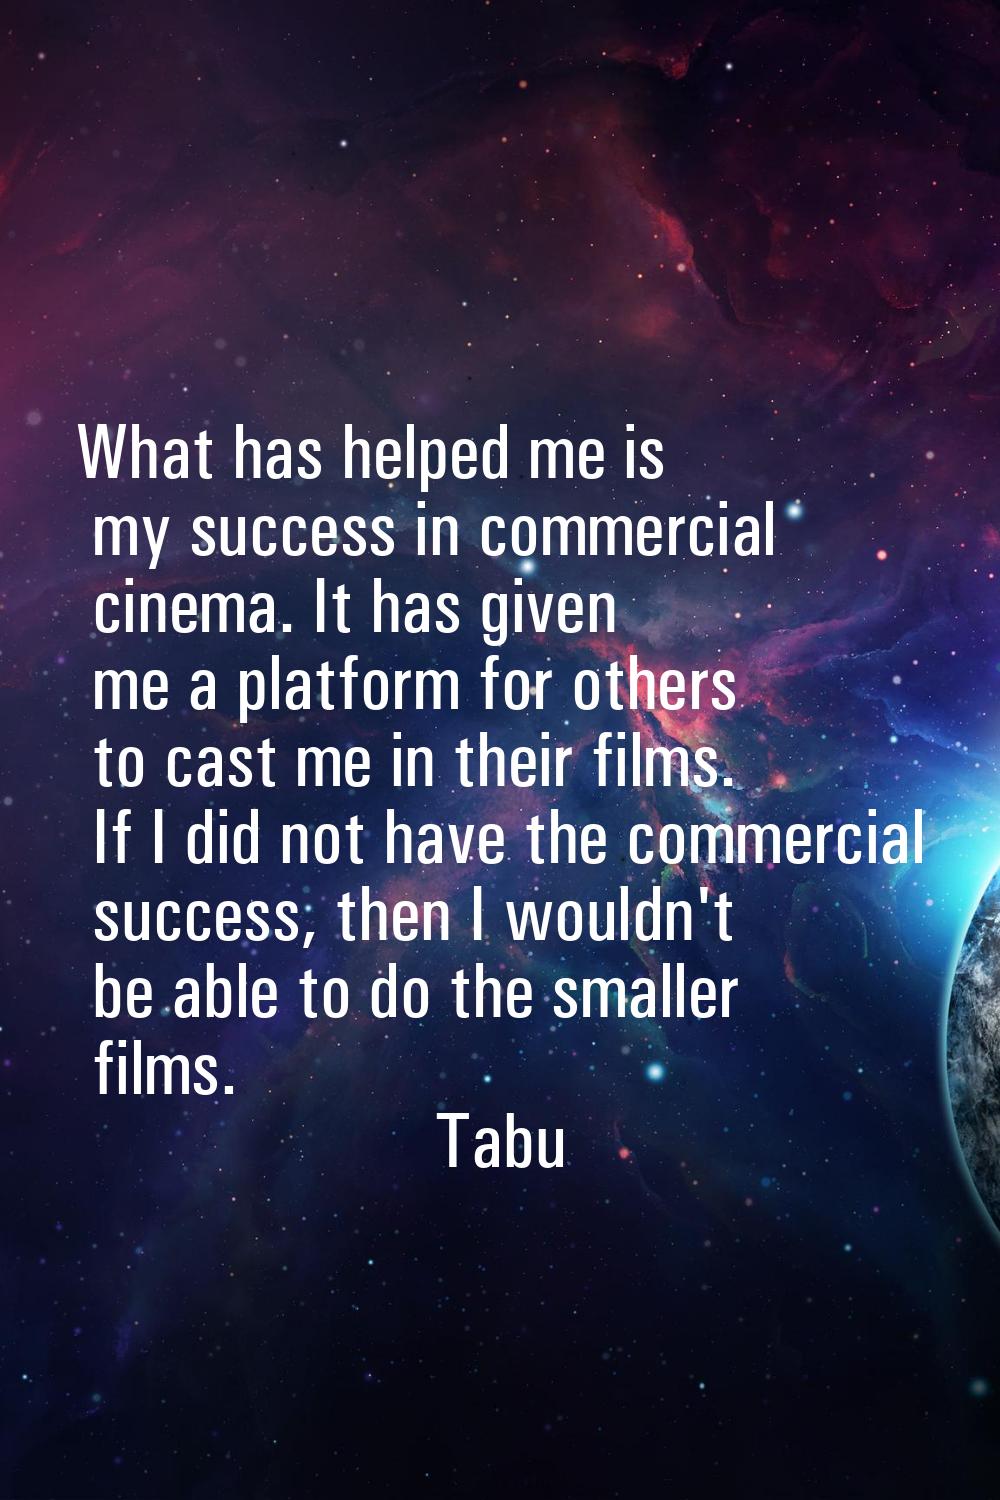 What has helped me is my success in commercial cinema. It has given me a platform for others to cas